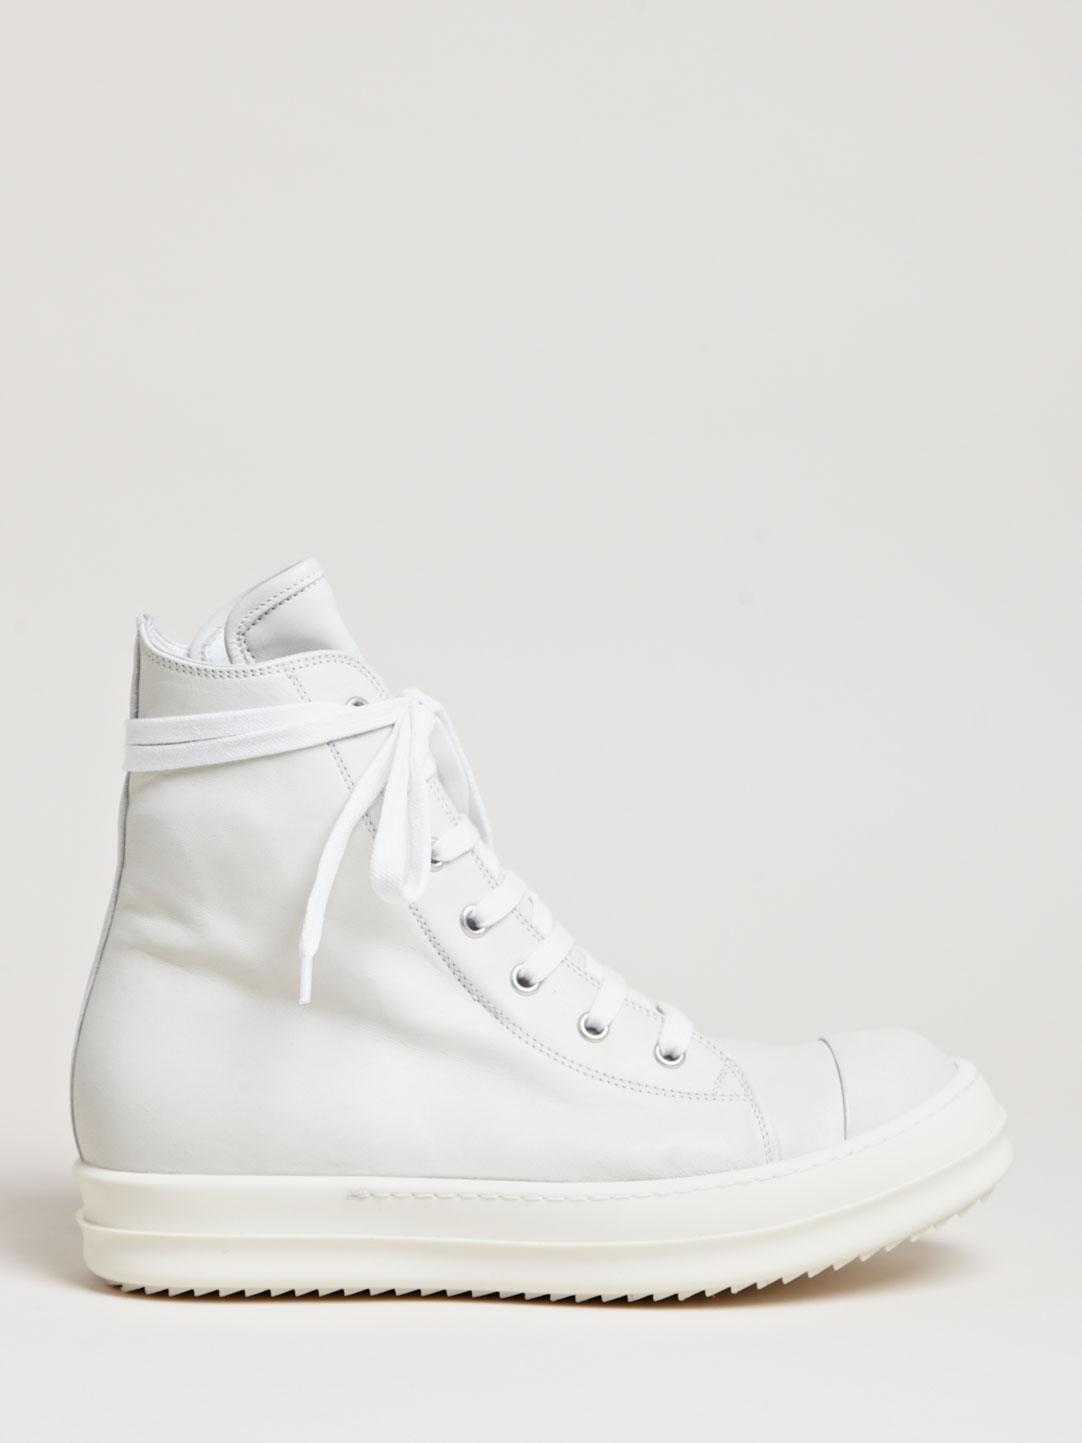 Lyst - Rick Owens Womens Shoes in Natural